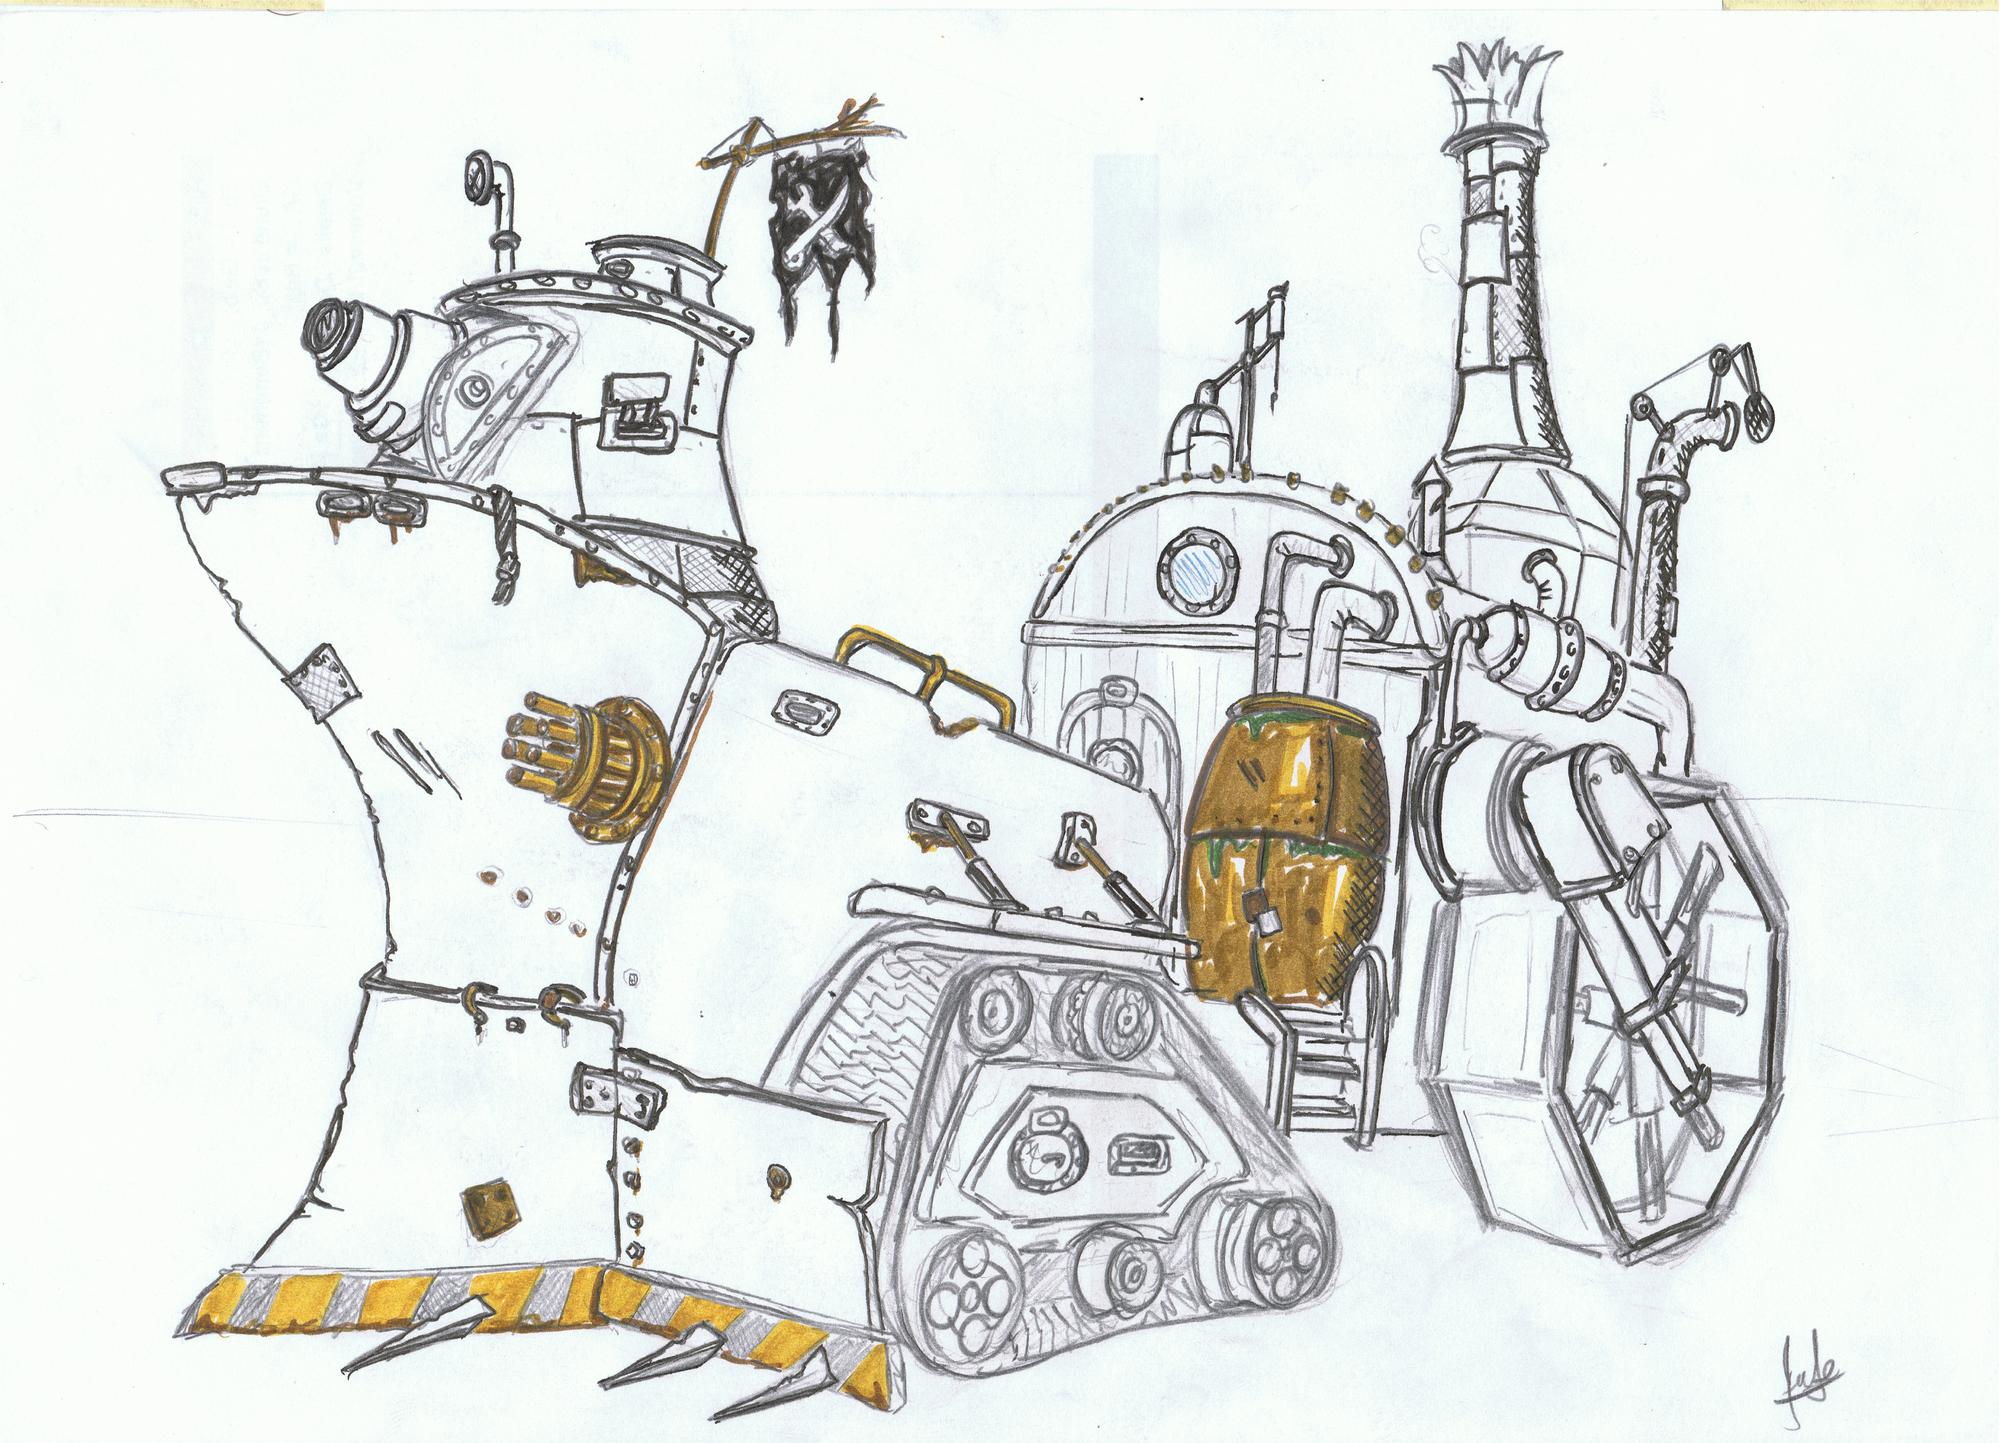 Steampunk ship thing from a different angle